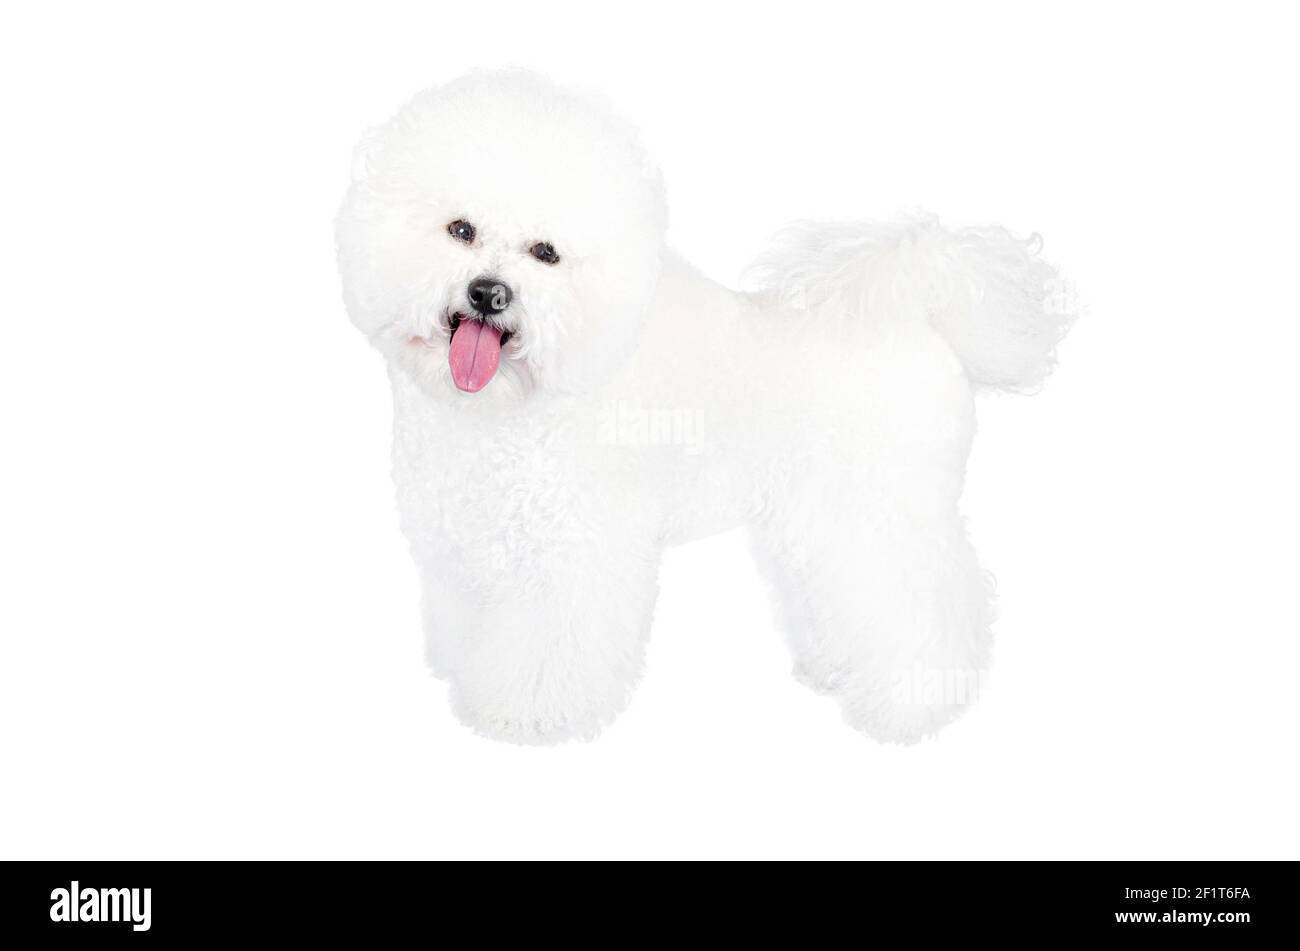 Bichon Frise dog poses standing still and looking at the camera with the tongue sticking out isolated on white. Stock Photo